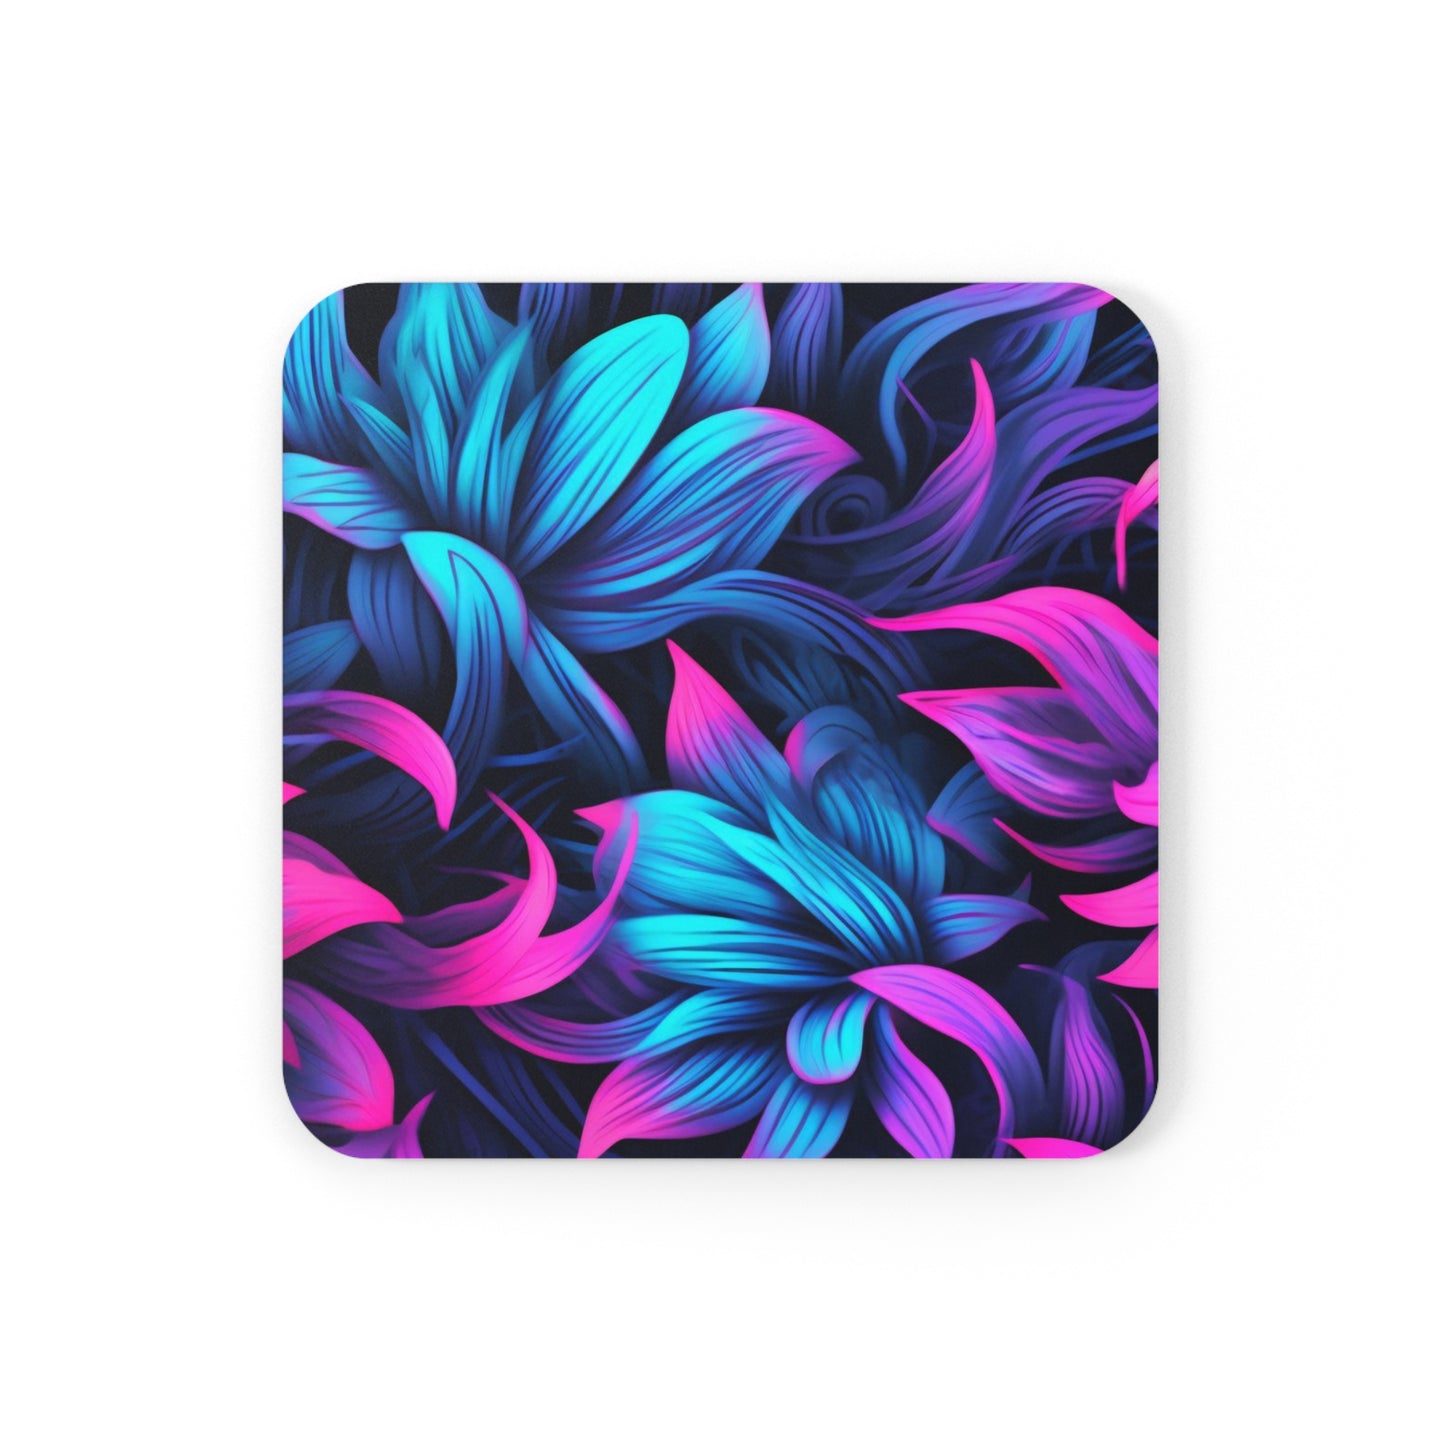 Synthwave Flowers Coaster Set of 4, Vaporwave Retro 80s Floral Coffee Cup Mats, Neon Pink Blue Coffee Table Decor, Groovy Vibrant Coasters